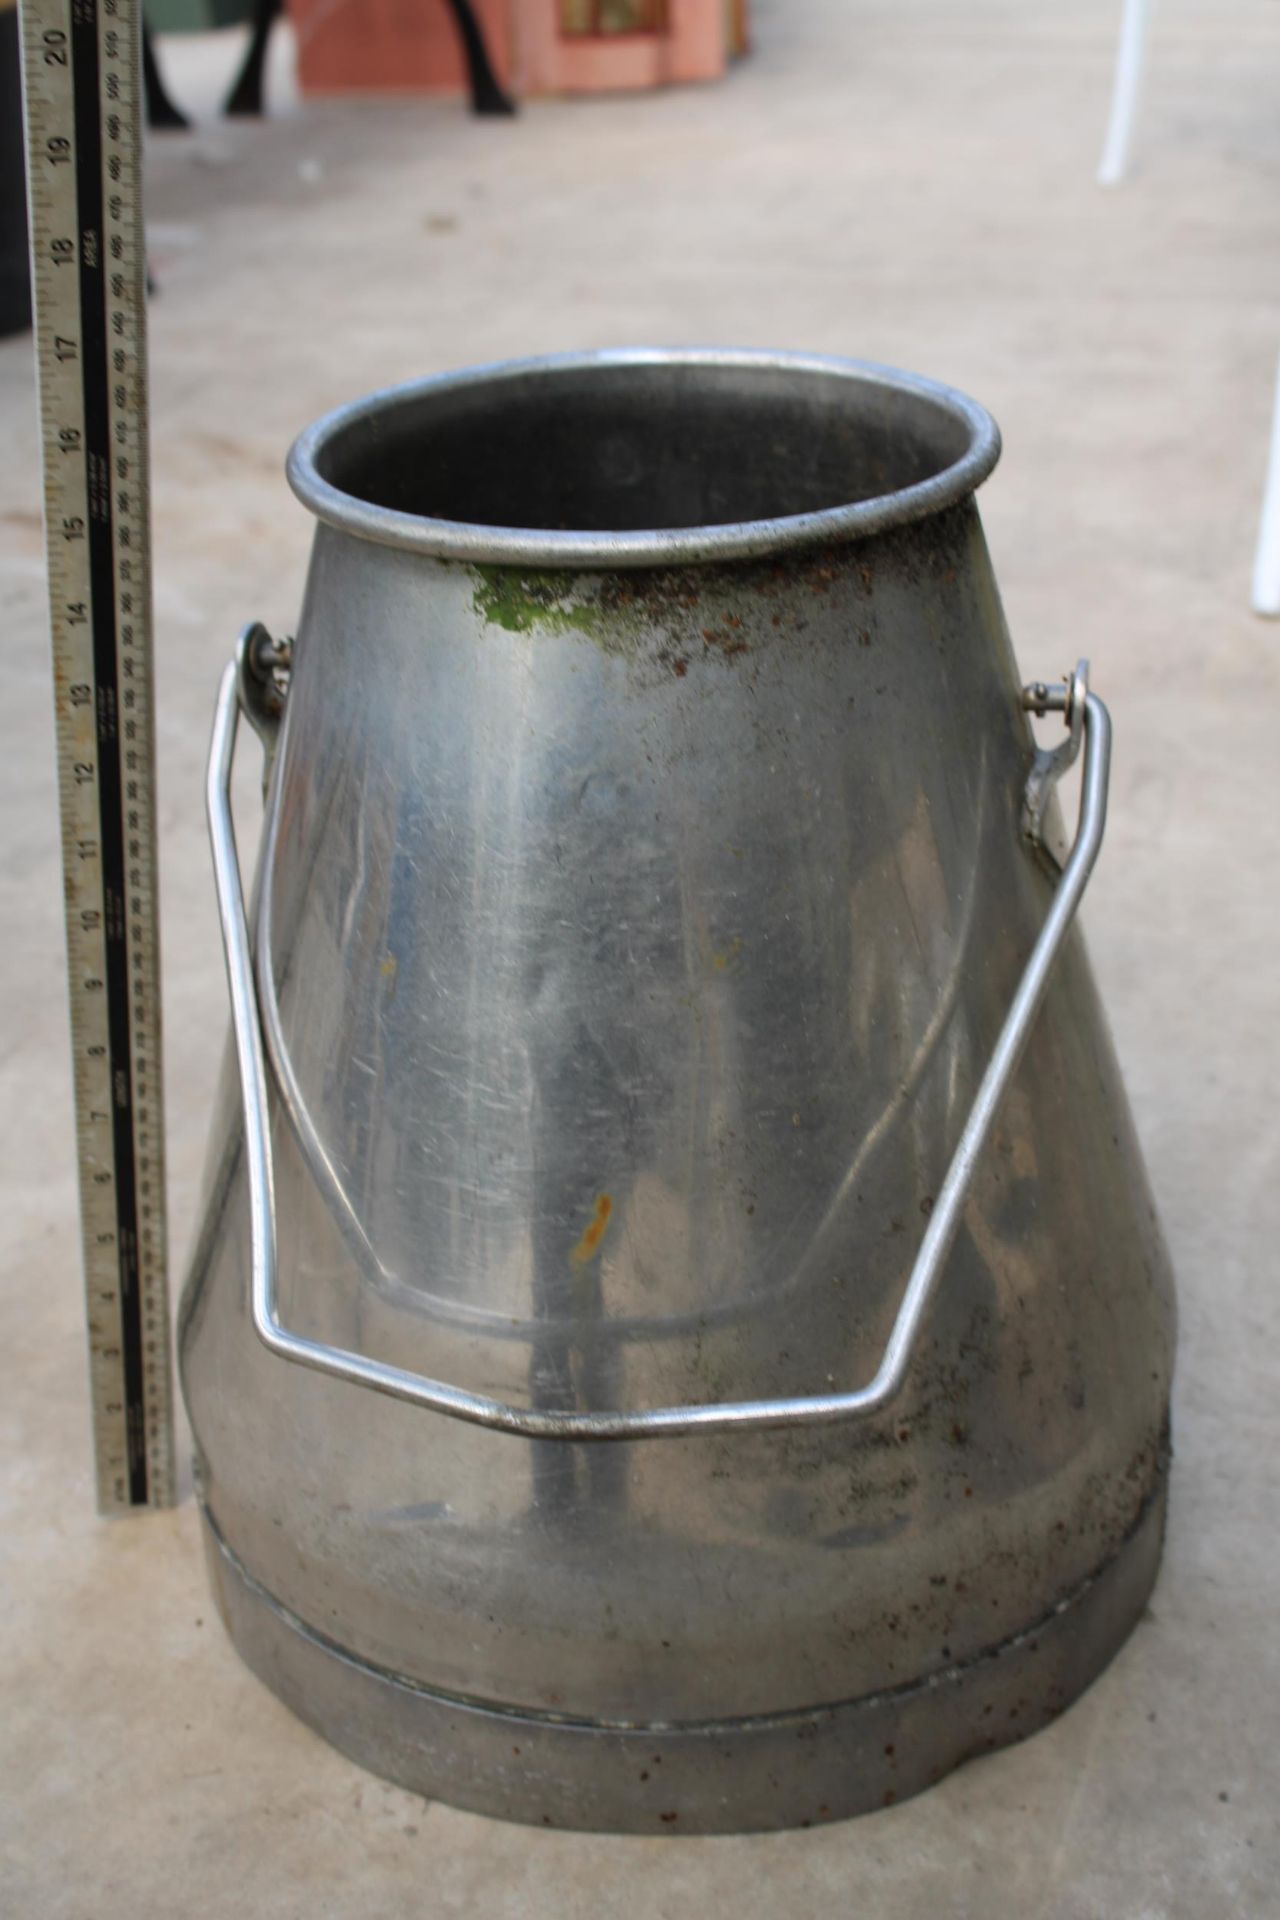 A HAND PAINTED STAINLESS STEEL MILKING BUCKET